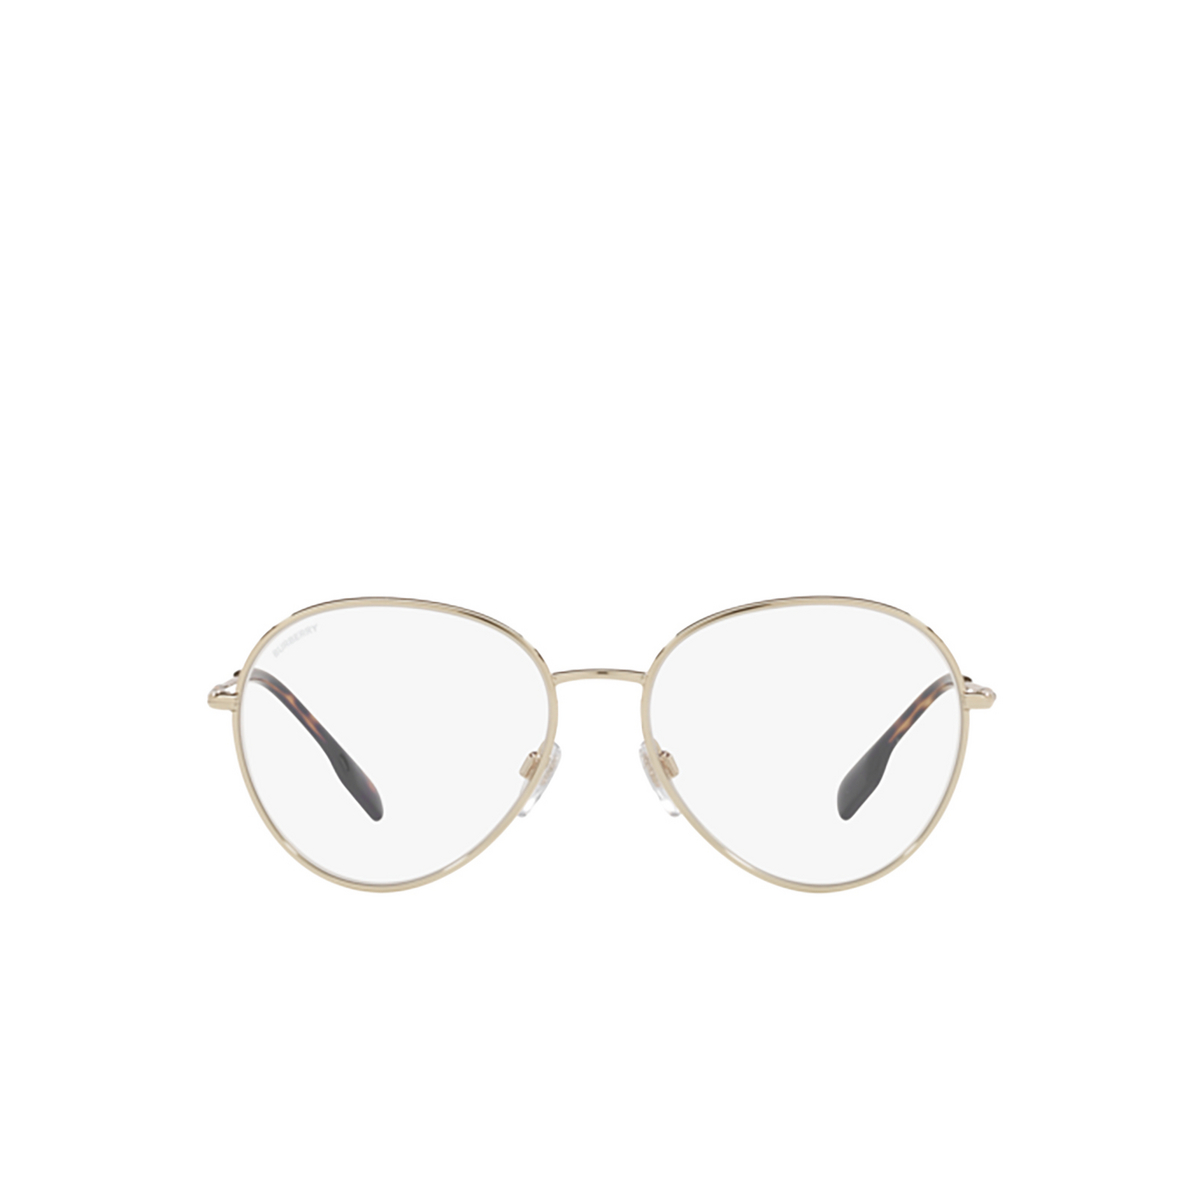 Burberry FELICITY Eyeglasses 1340 Light Gold - front view